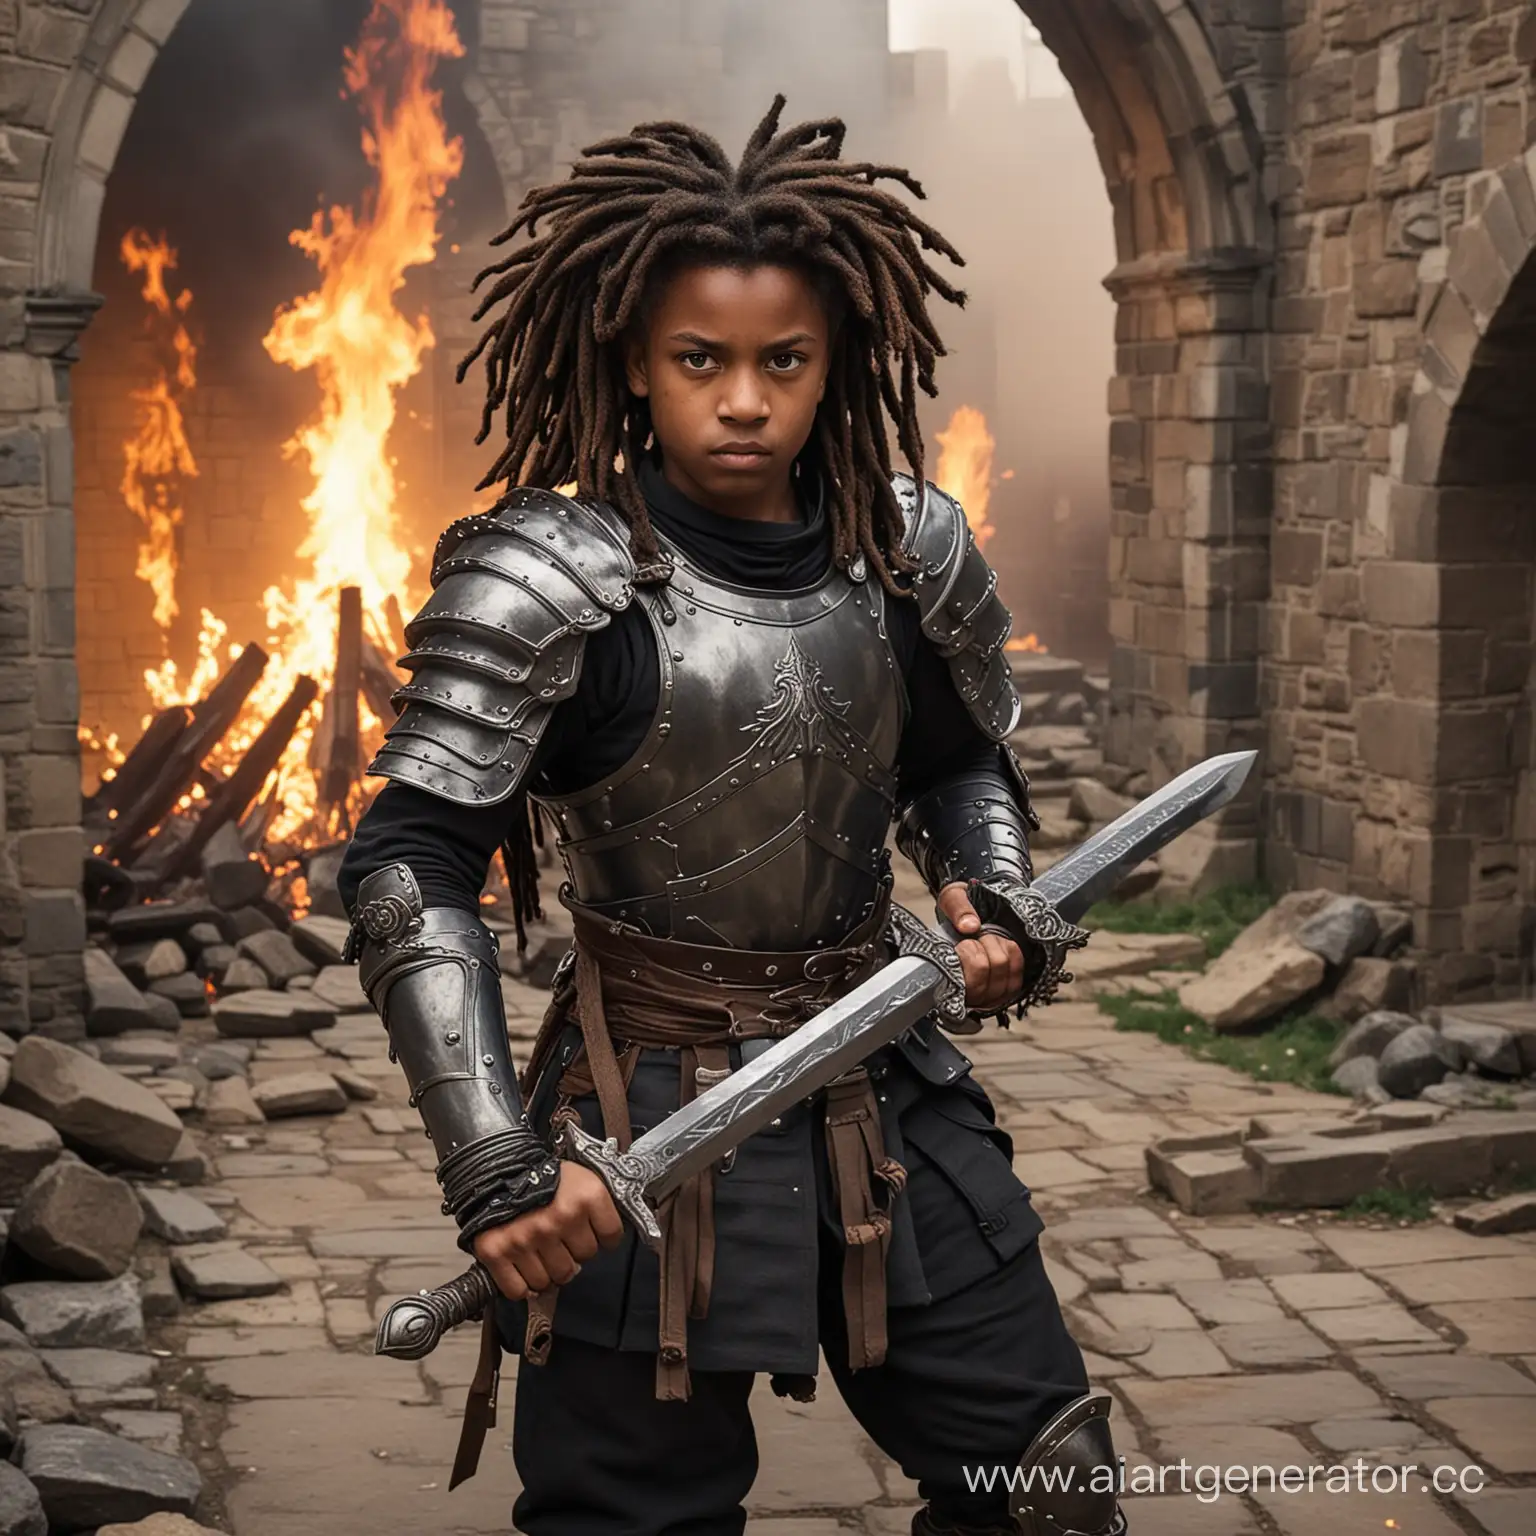 A very young black teenage boy warrior with dreadlocks, wearing an armor and carrying a sword, fighting in a castle, fire bacground.